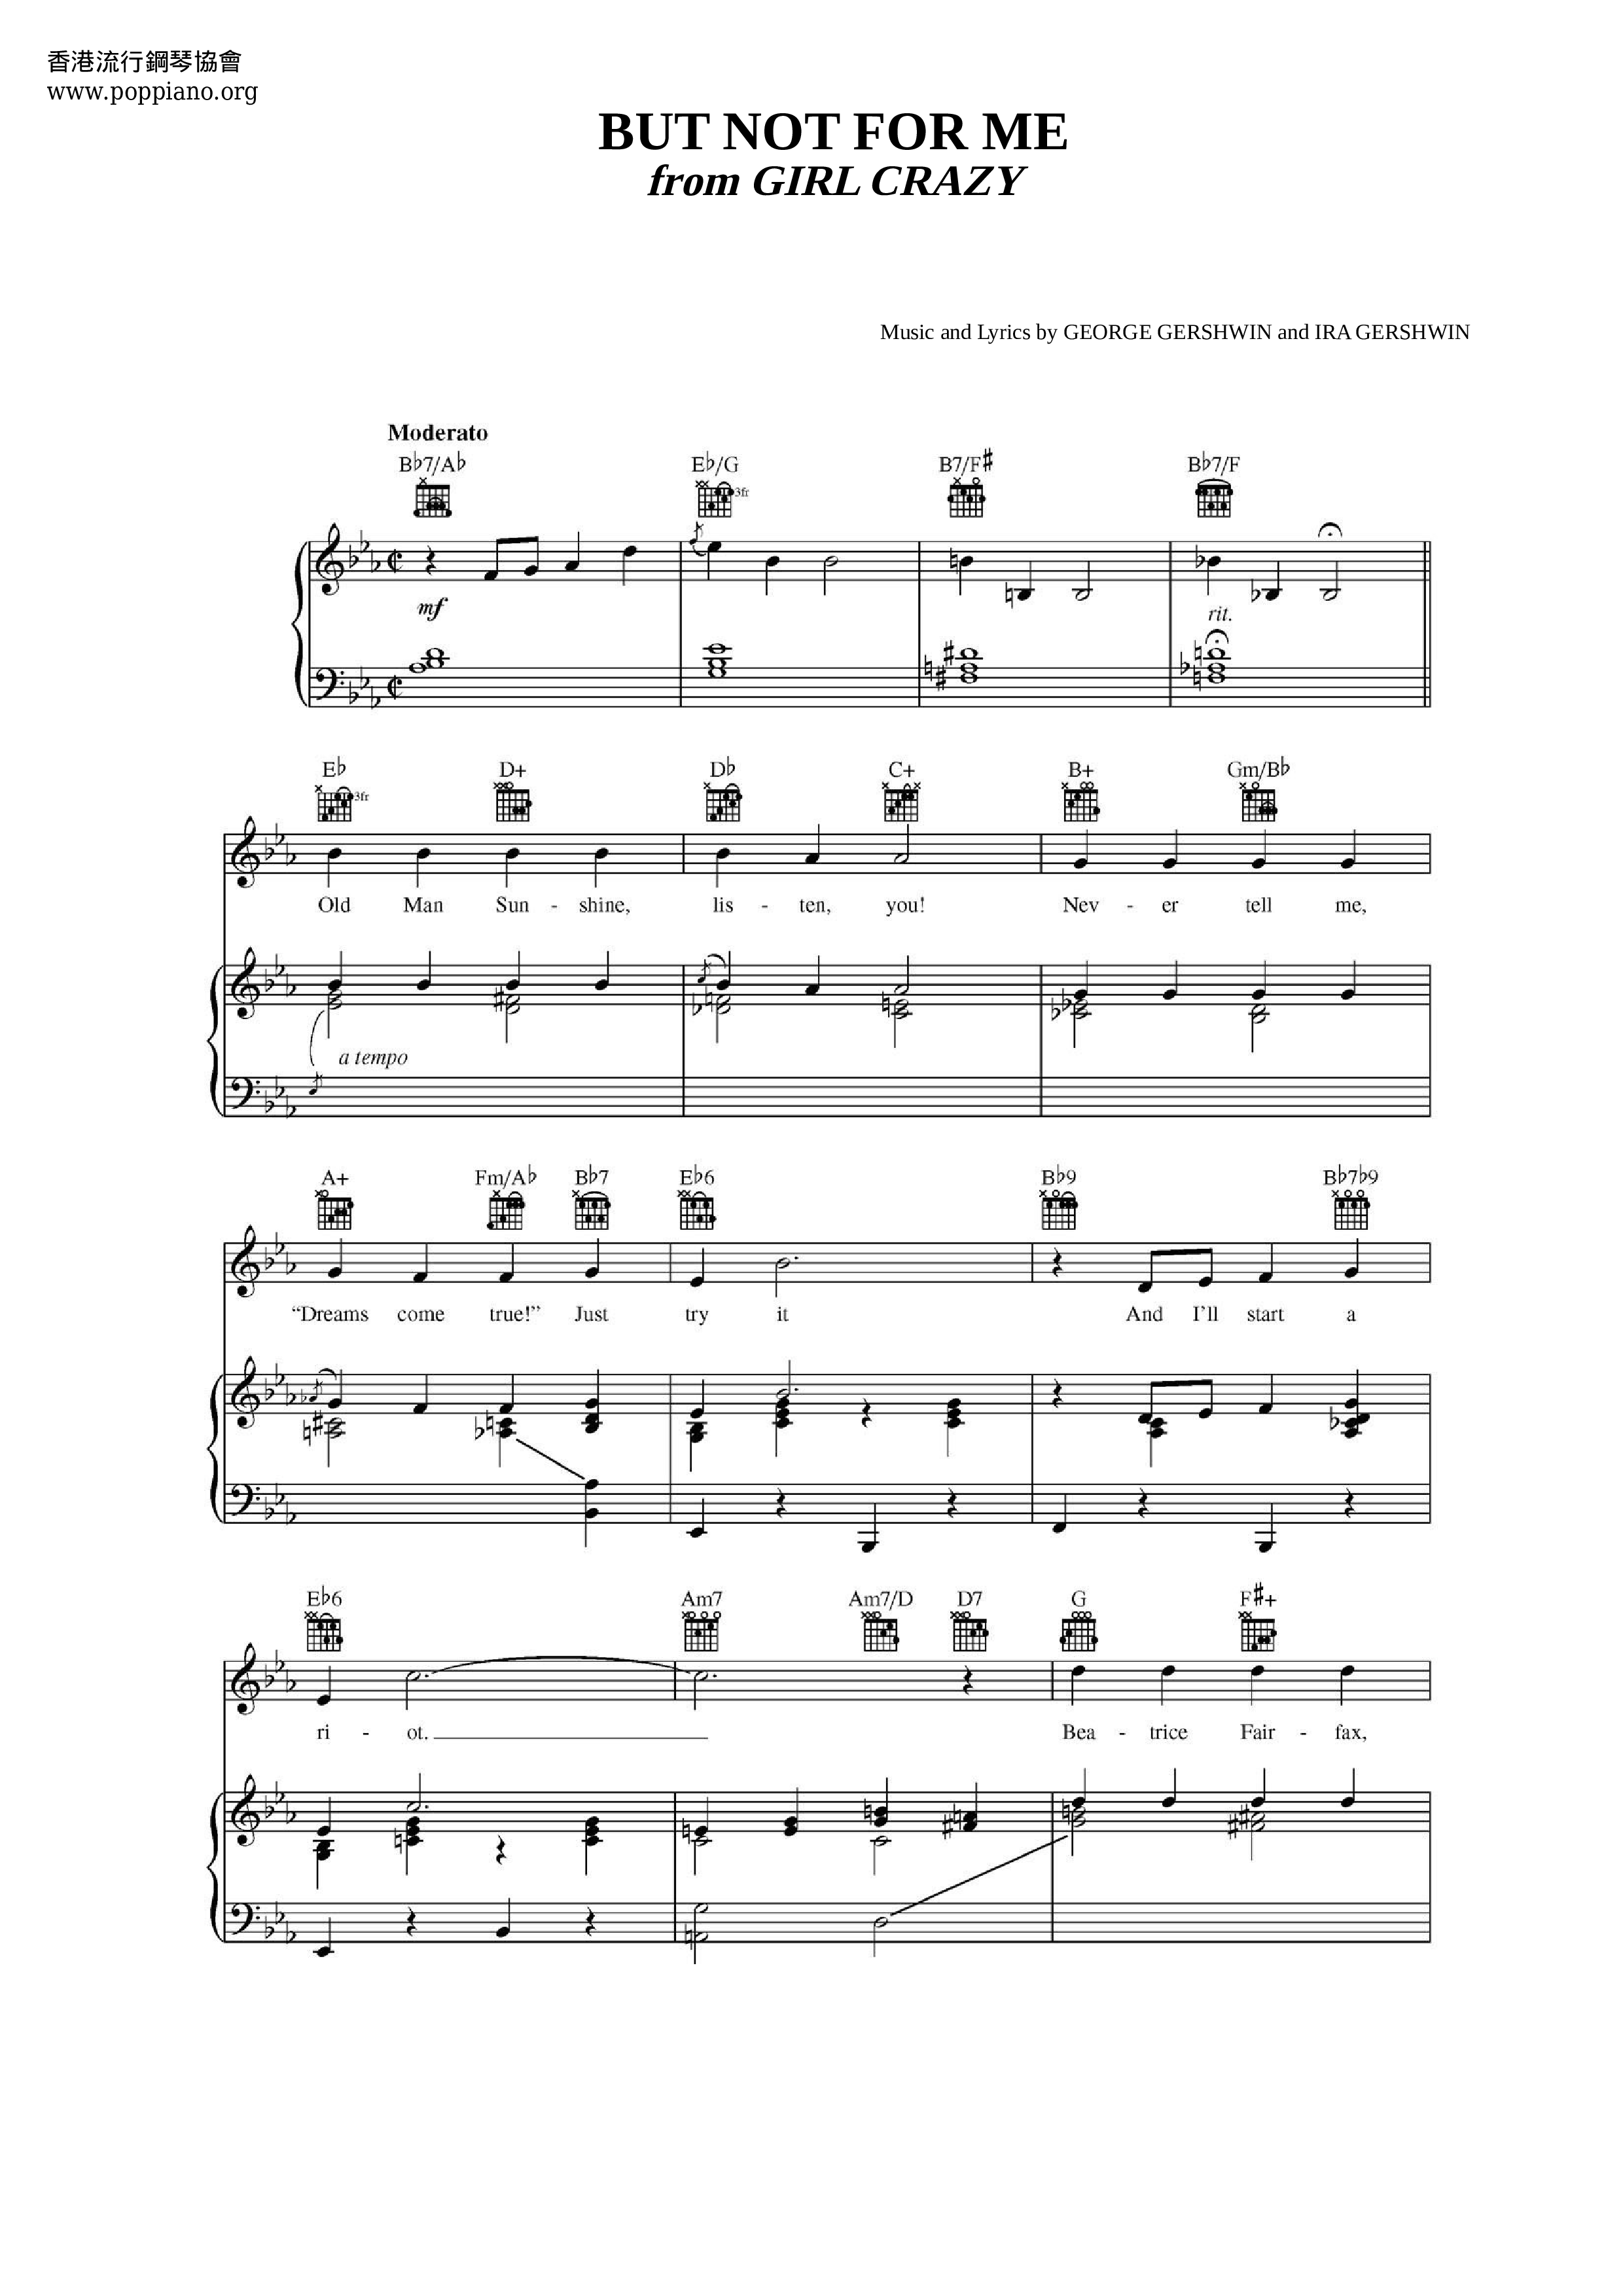 Frank Sinatra But Not For Me Sheet Music Pdf Free Score Download